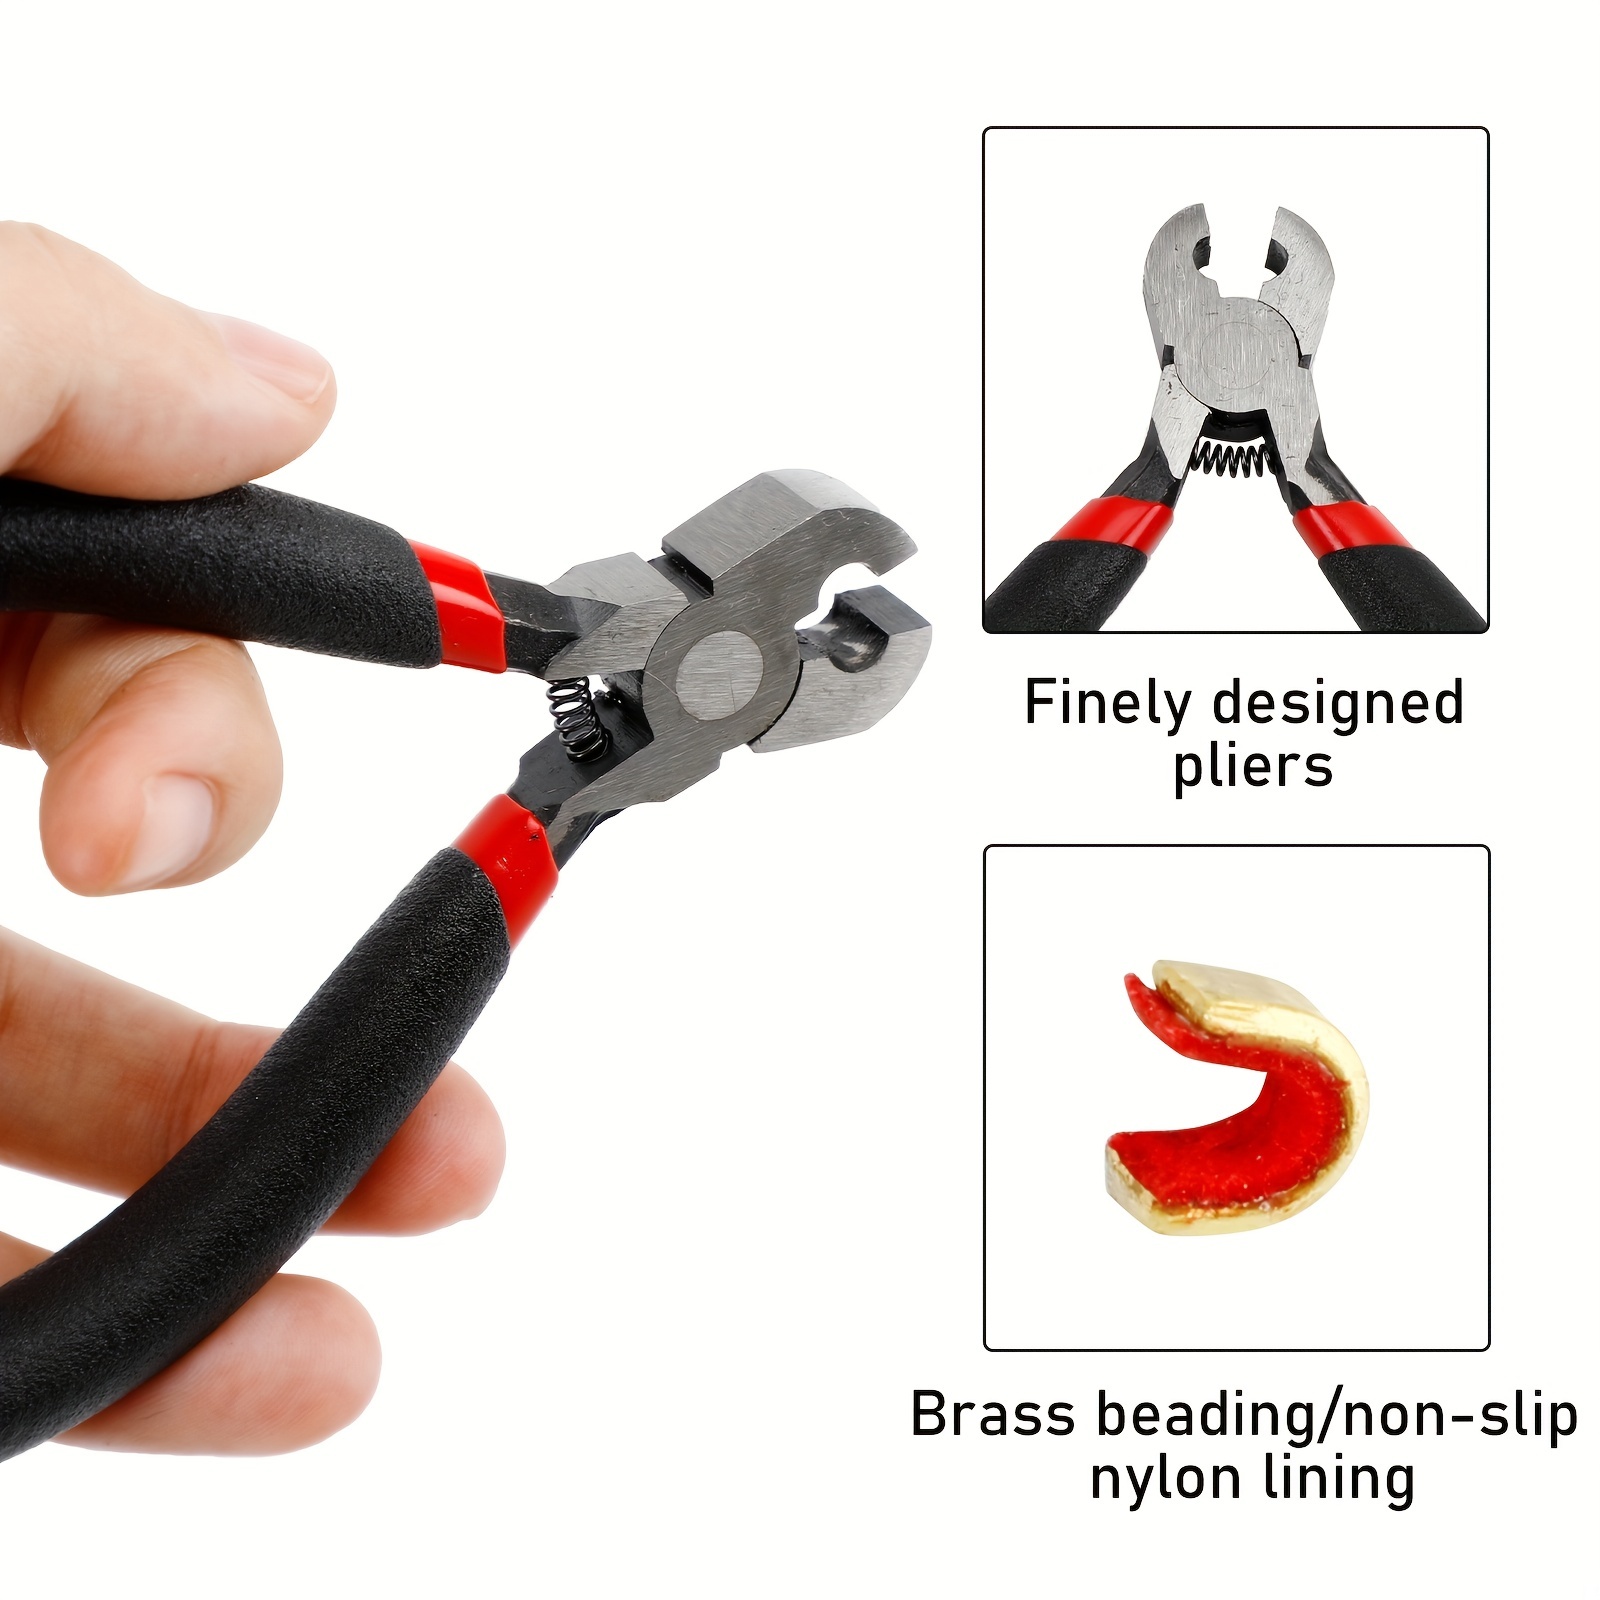 Archery Nocking Point Pliers D Loop String Clamp for Bow - by